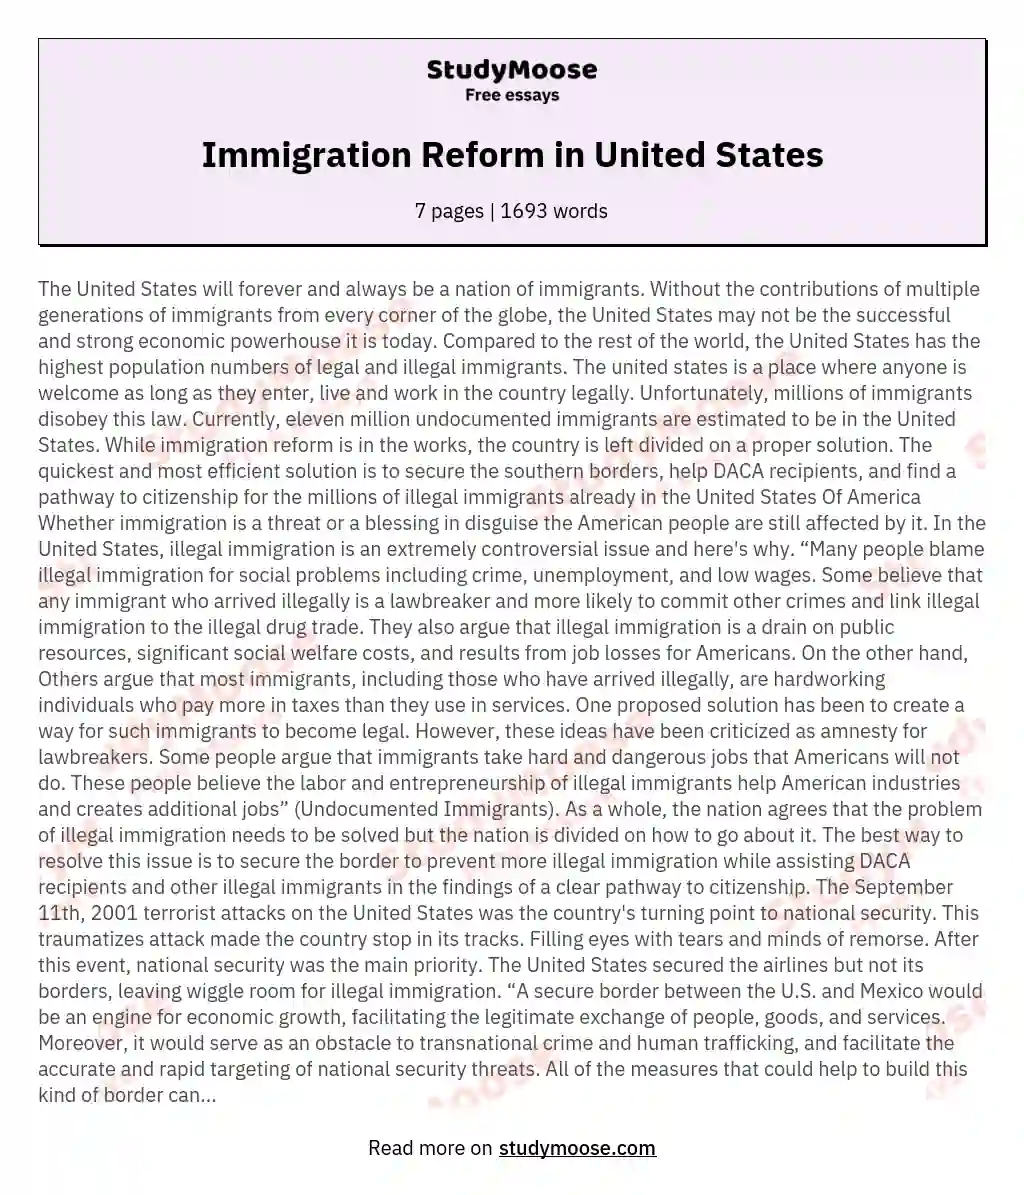 immigration in the united states essay